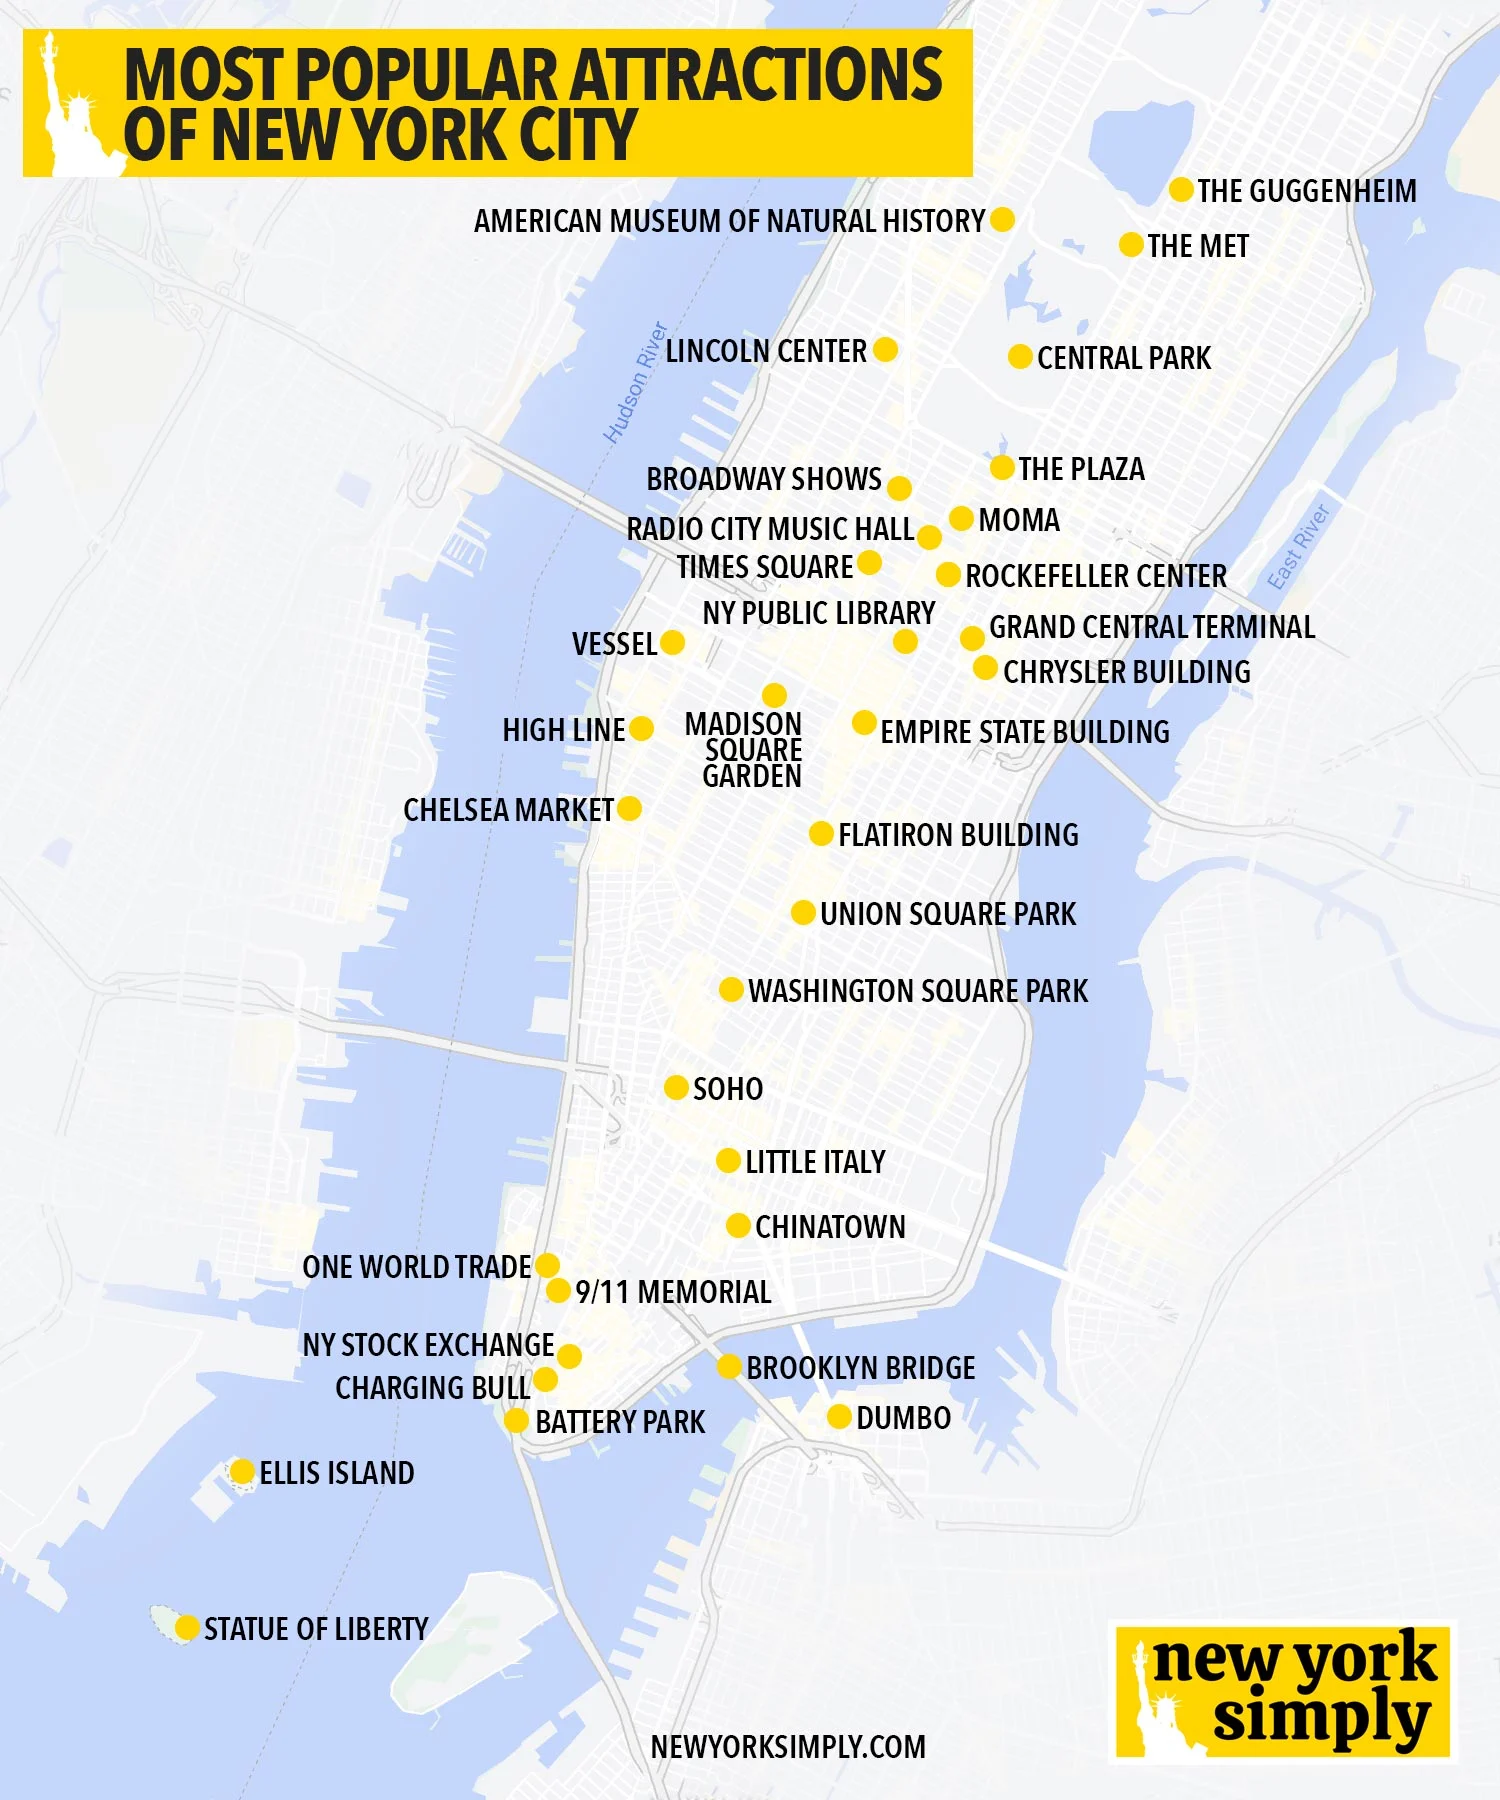 nyc tourist attractions map, new york city tourist attractions map, new york city attractions map